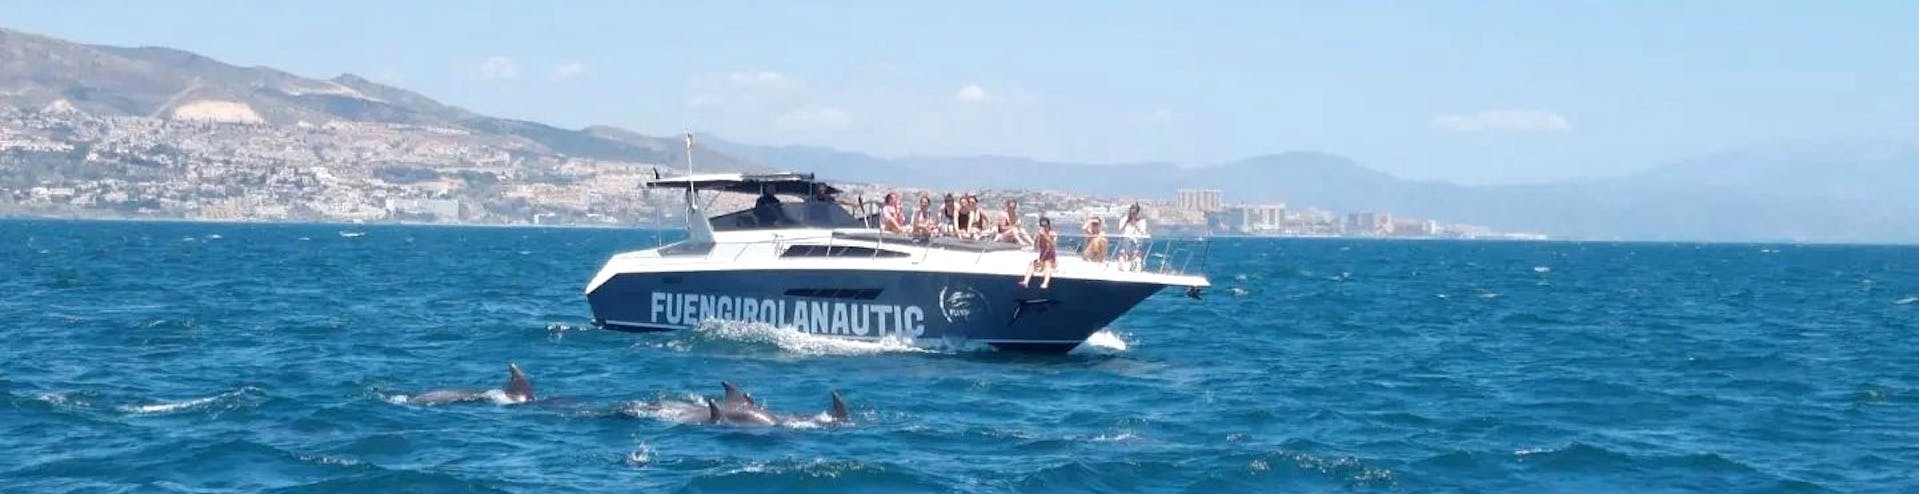 People observing dolphins from the boat during a Semi-Private Boat Trip from Fuengirola with Dolphin Watching with Fuengirolanautic.